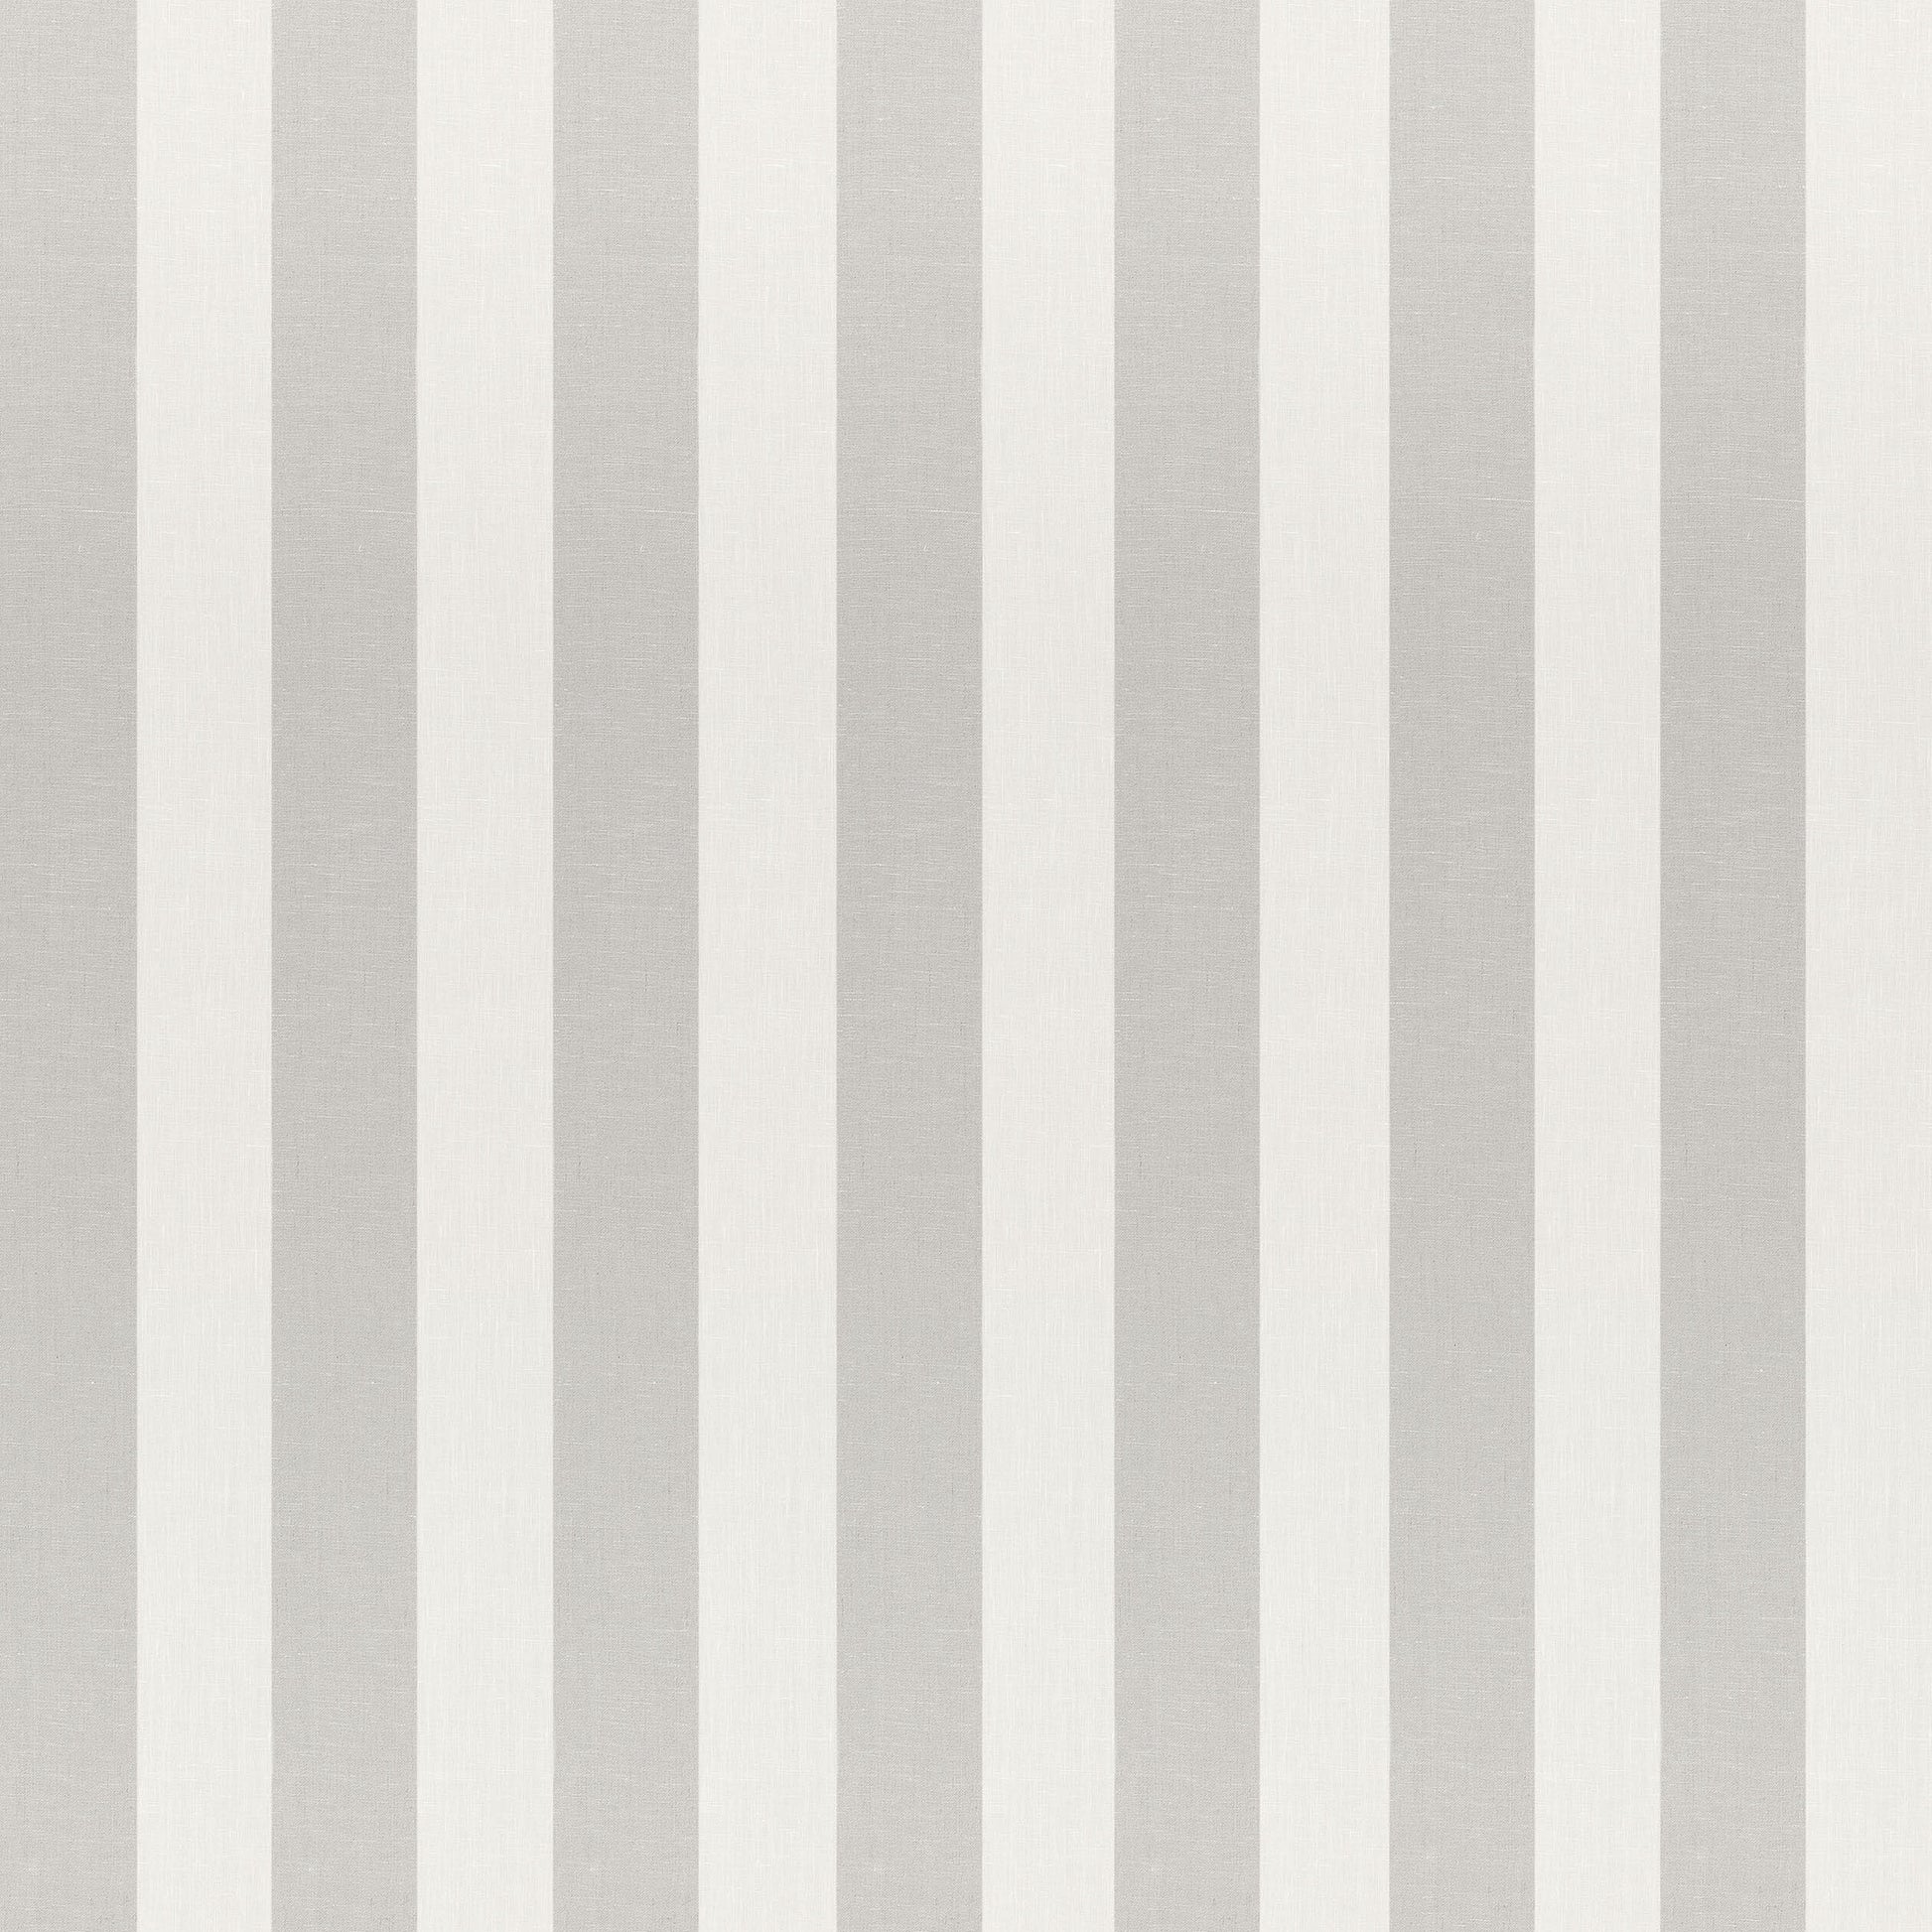 Purchase  Ann French Fabric Product# AW9114  pattern name  Kings Road Stripe